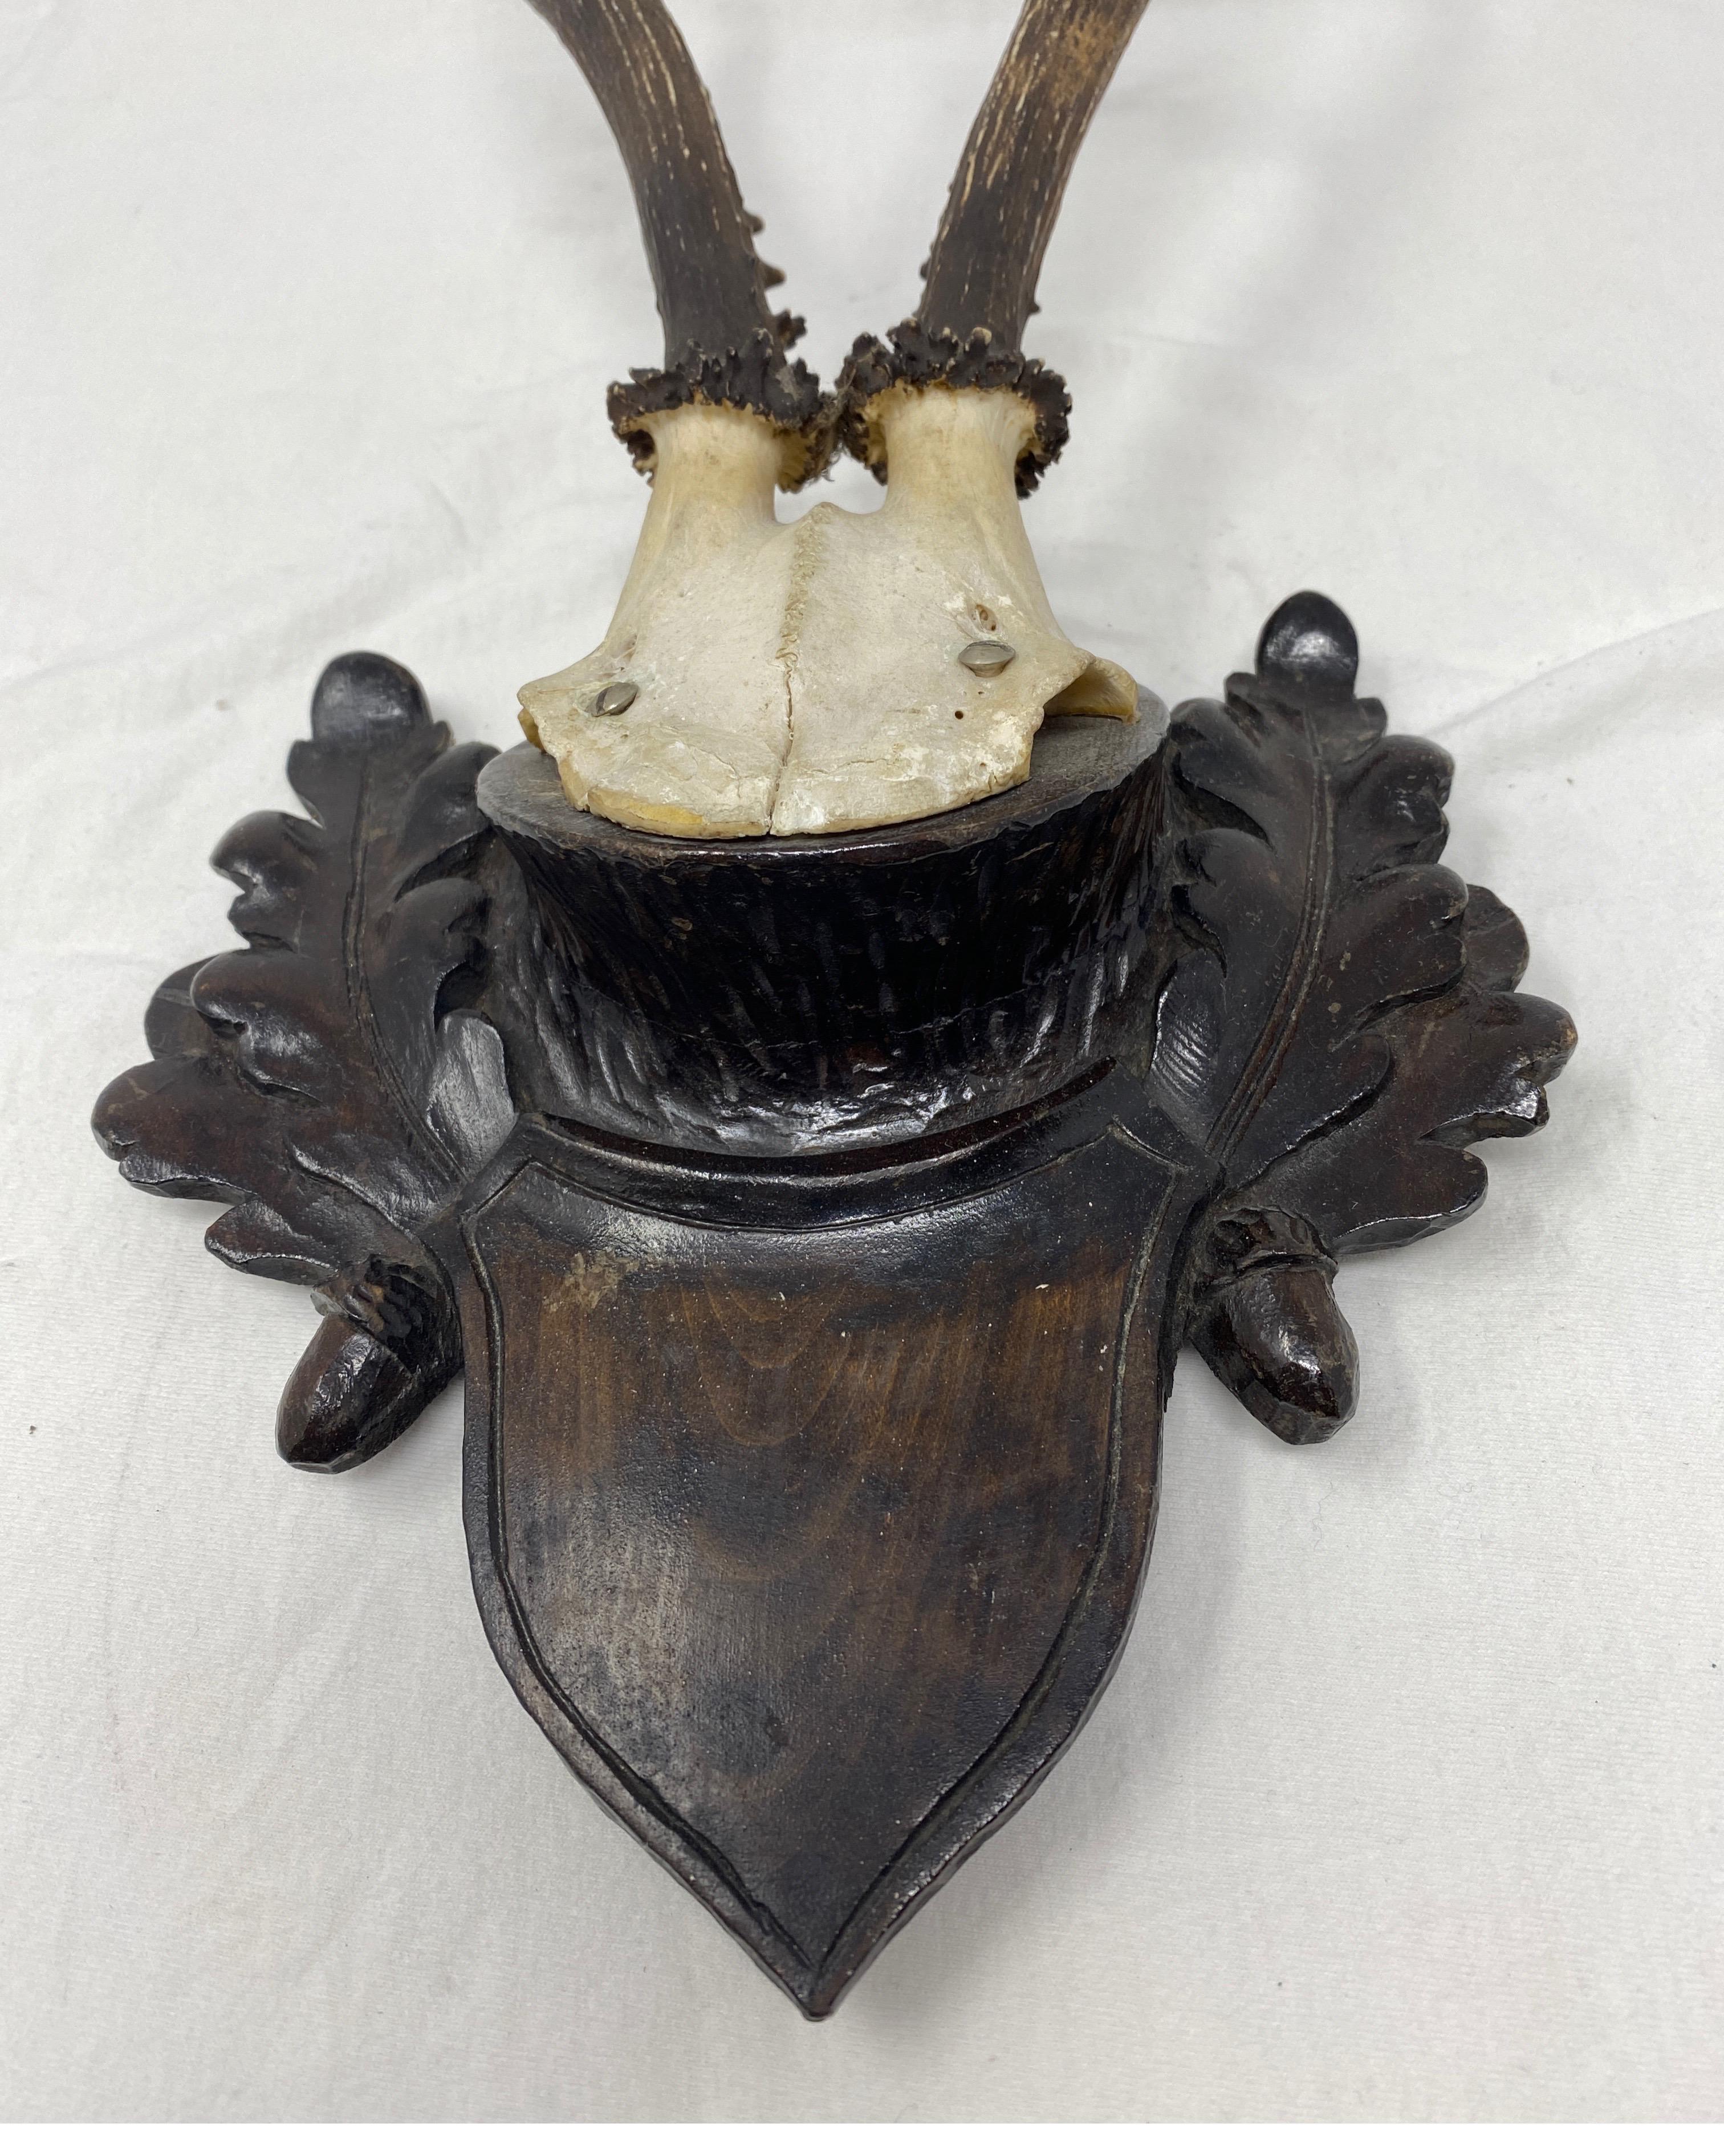 Vintage Black Forest deer antler trophy on hand carved, Black Forest wooden plaque. A nice addition to your hunters lodge or just to display in your home.